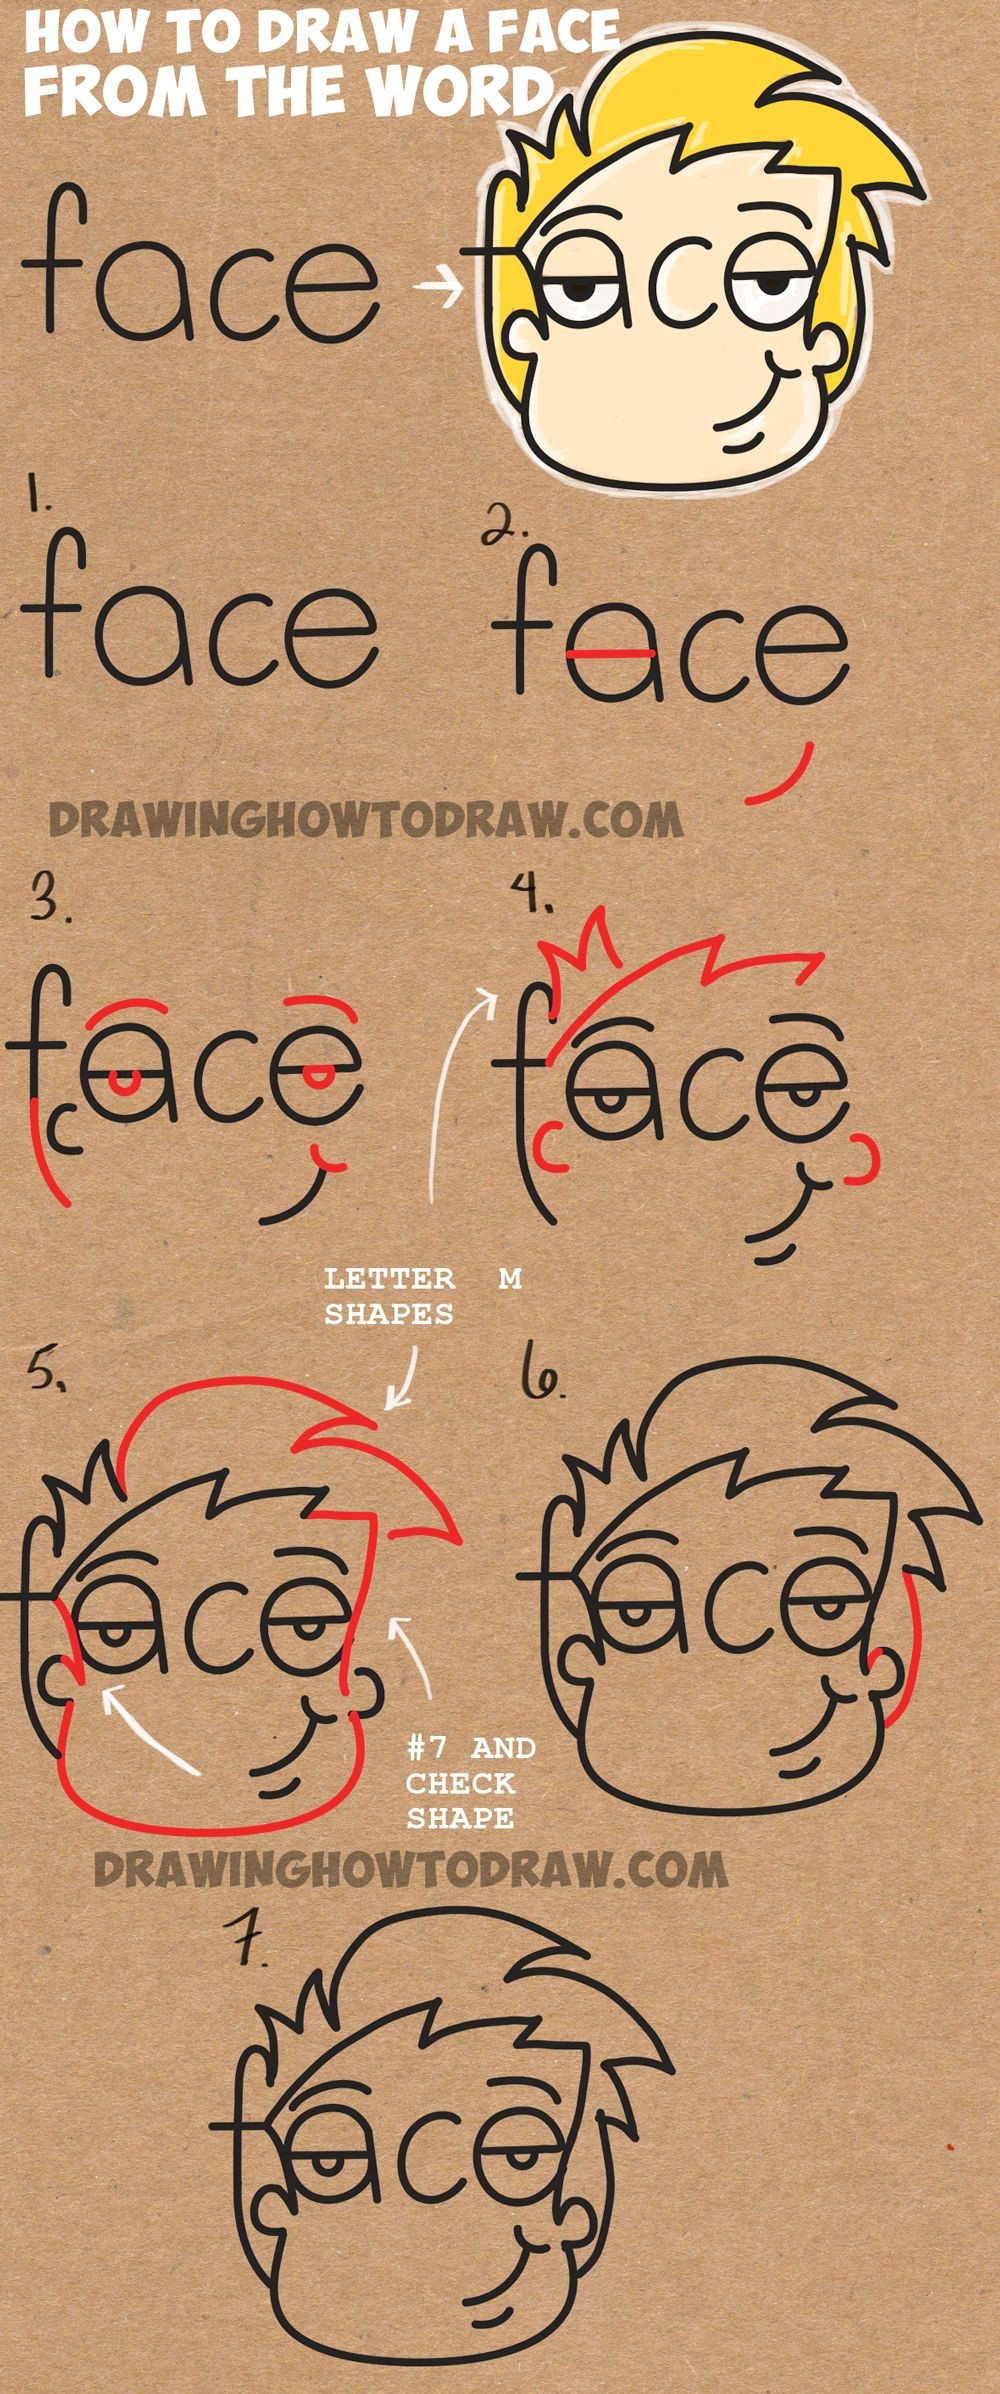 Drawing Cartoon Letters How to Draw Cartoon Faces From the Word Face Easy Step by Step